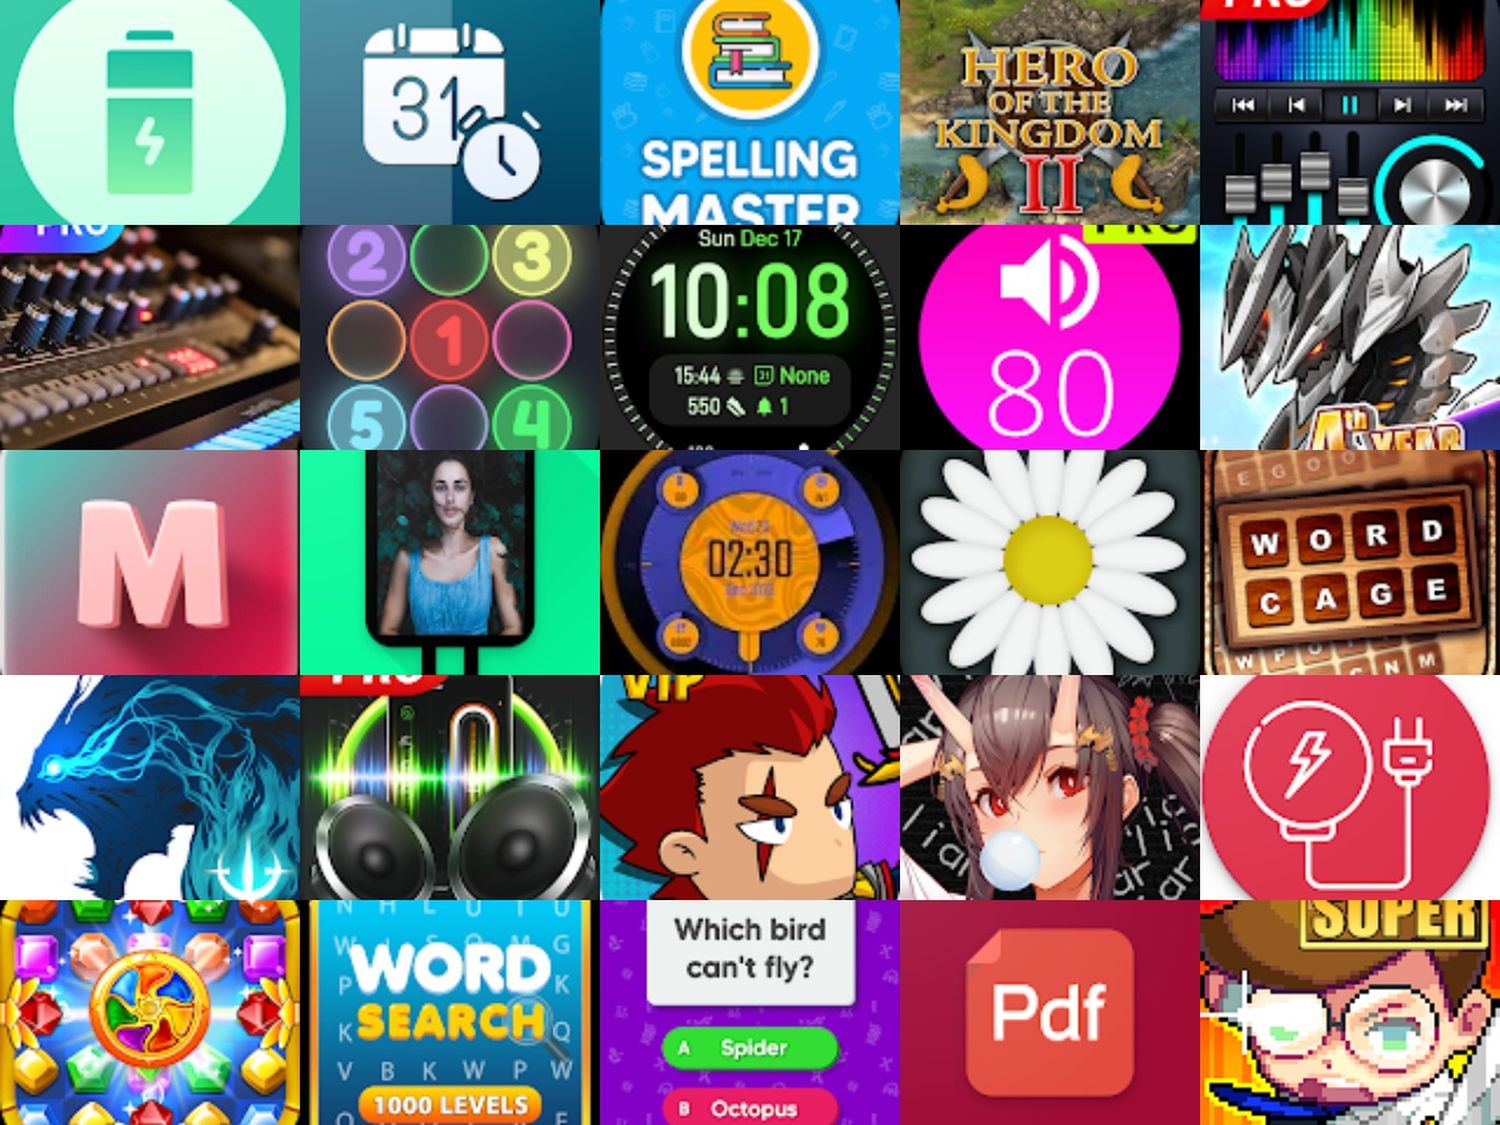 Google-Play-Store-Aktion-Diese-65-Android-Apps-Spiele-Icon-Packs-Live-Wallpaper-gibt-es-heute-Gratis